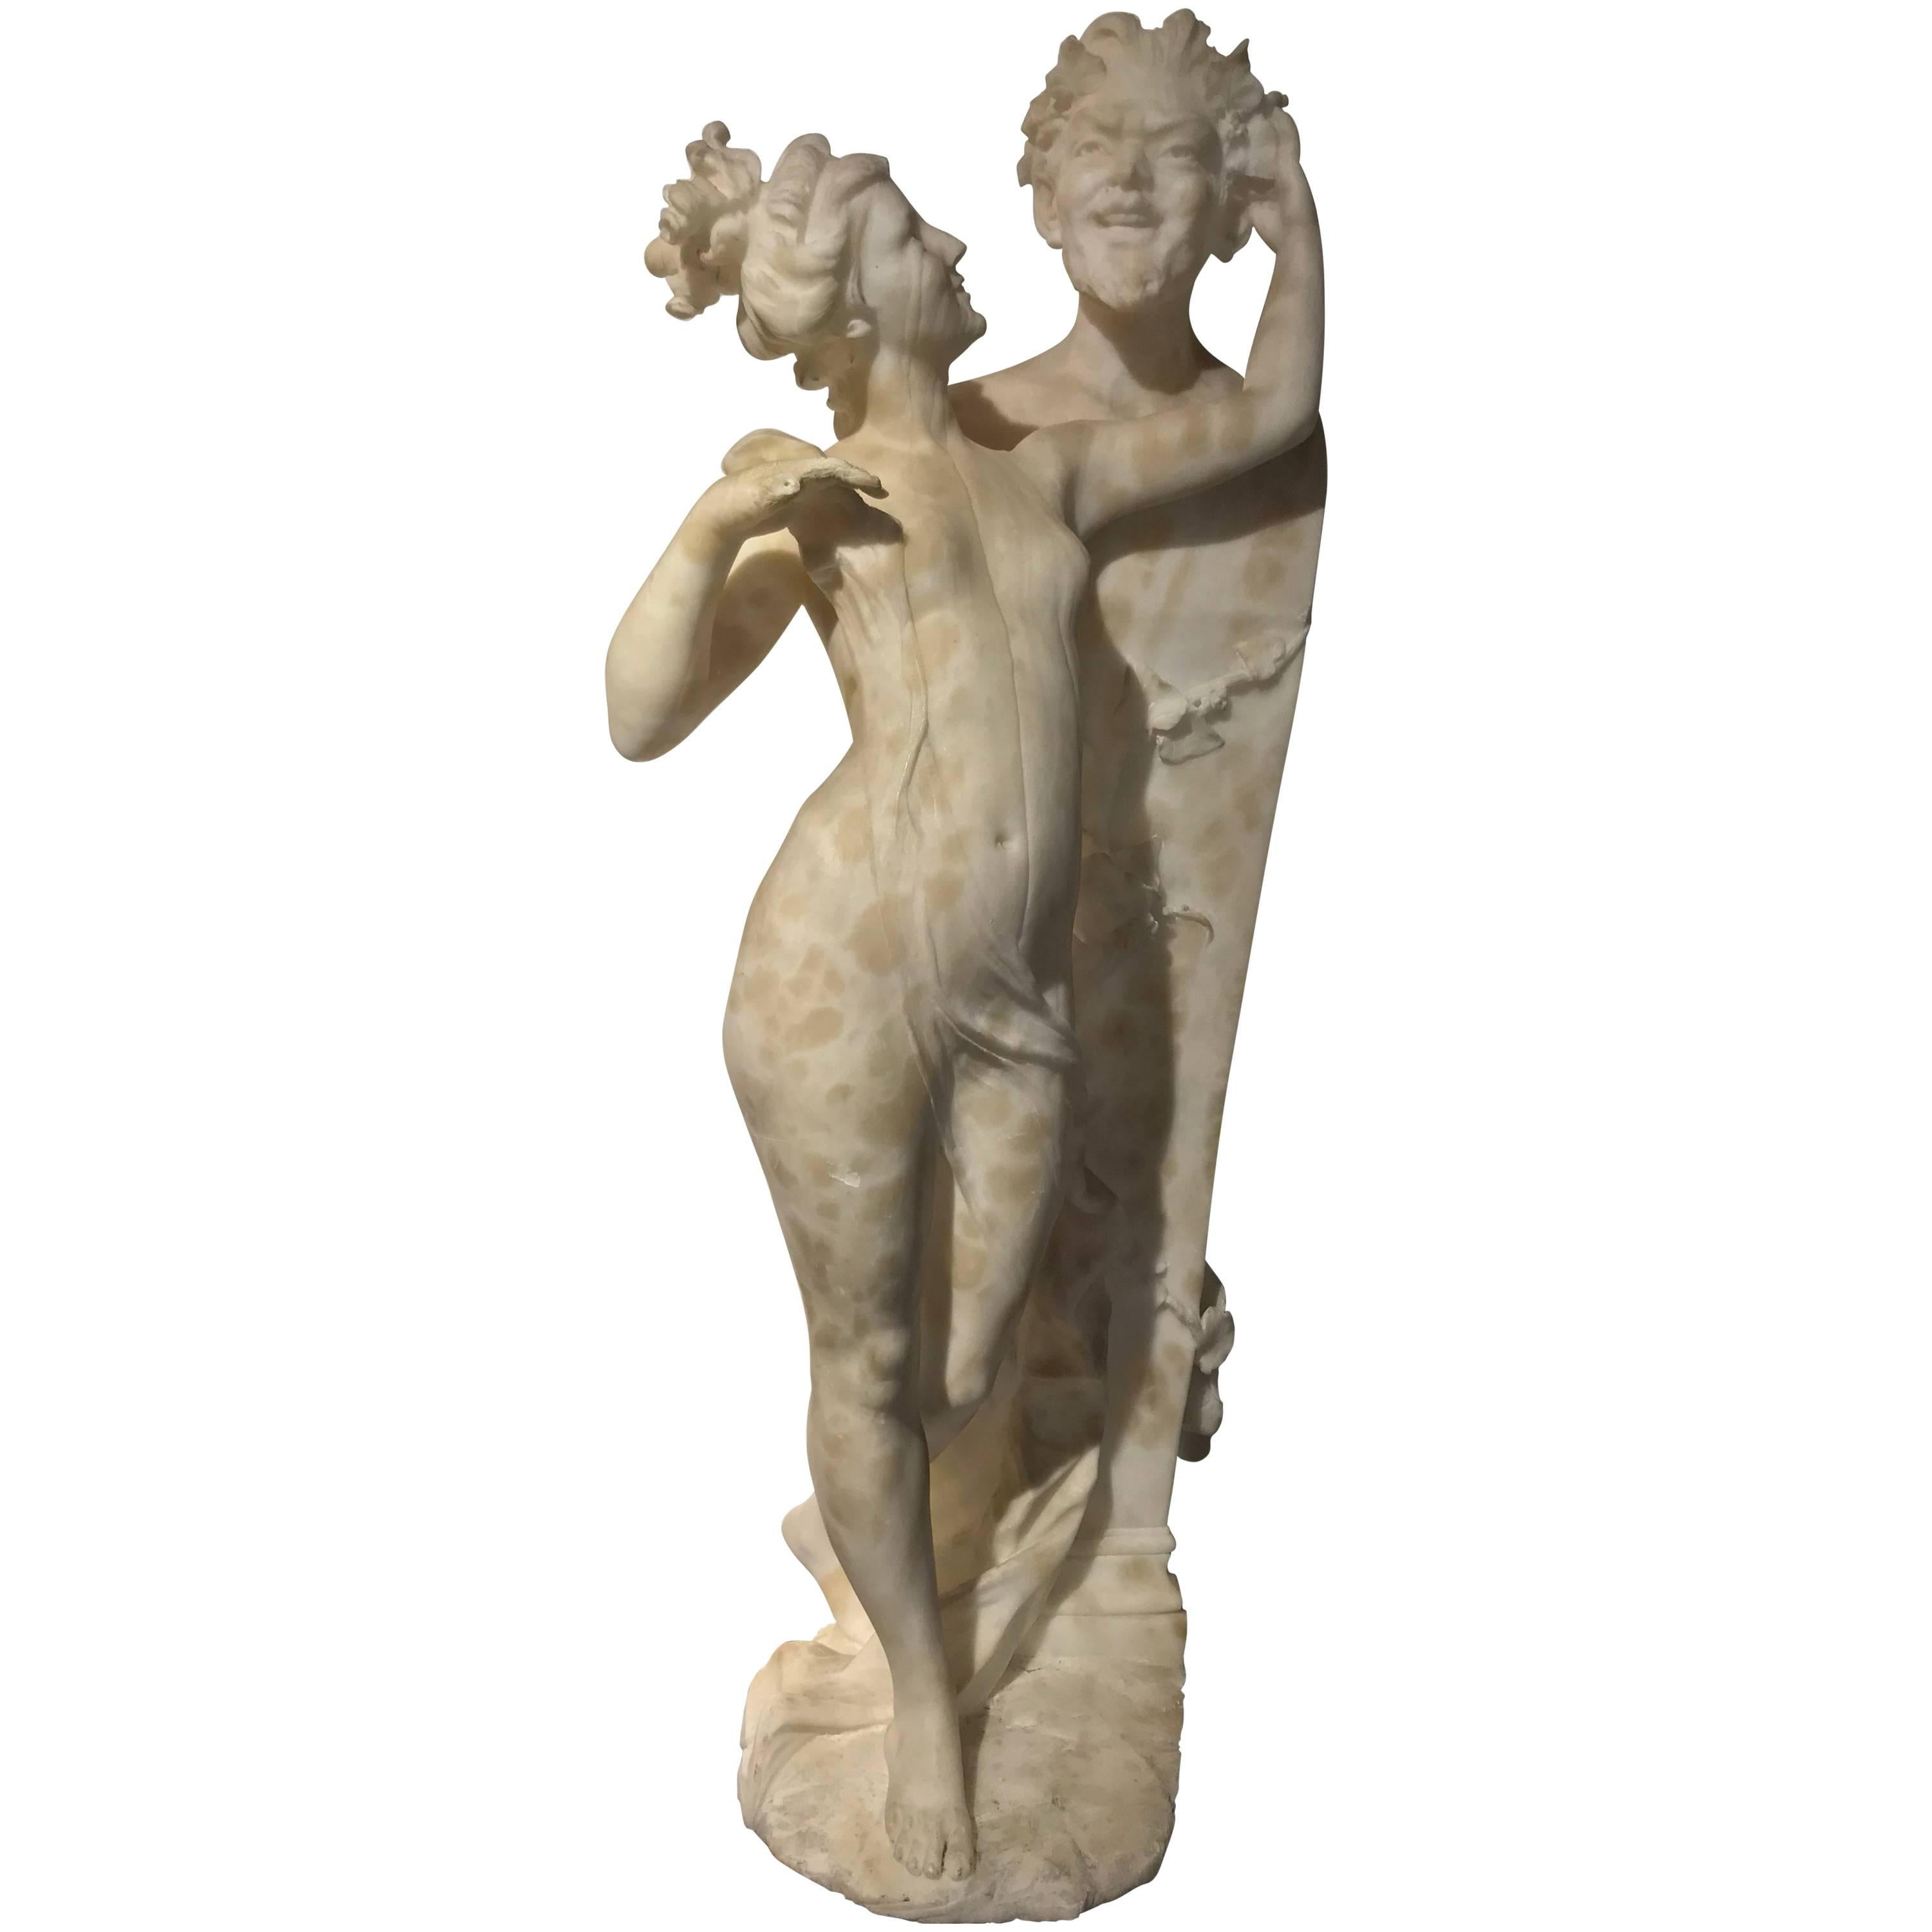 Italian Tuscany Neoclassical Style White Alabaster Sculpture Signed Fiaschi For Sale